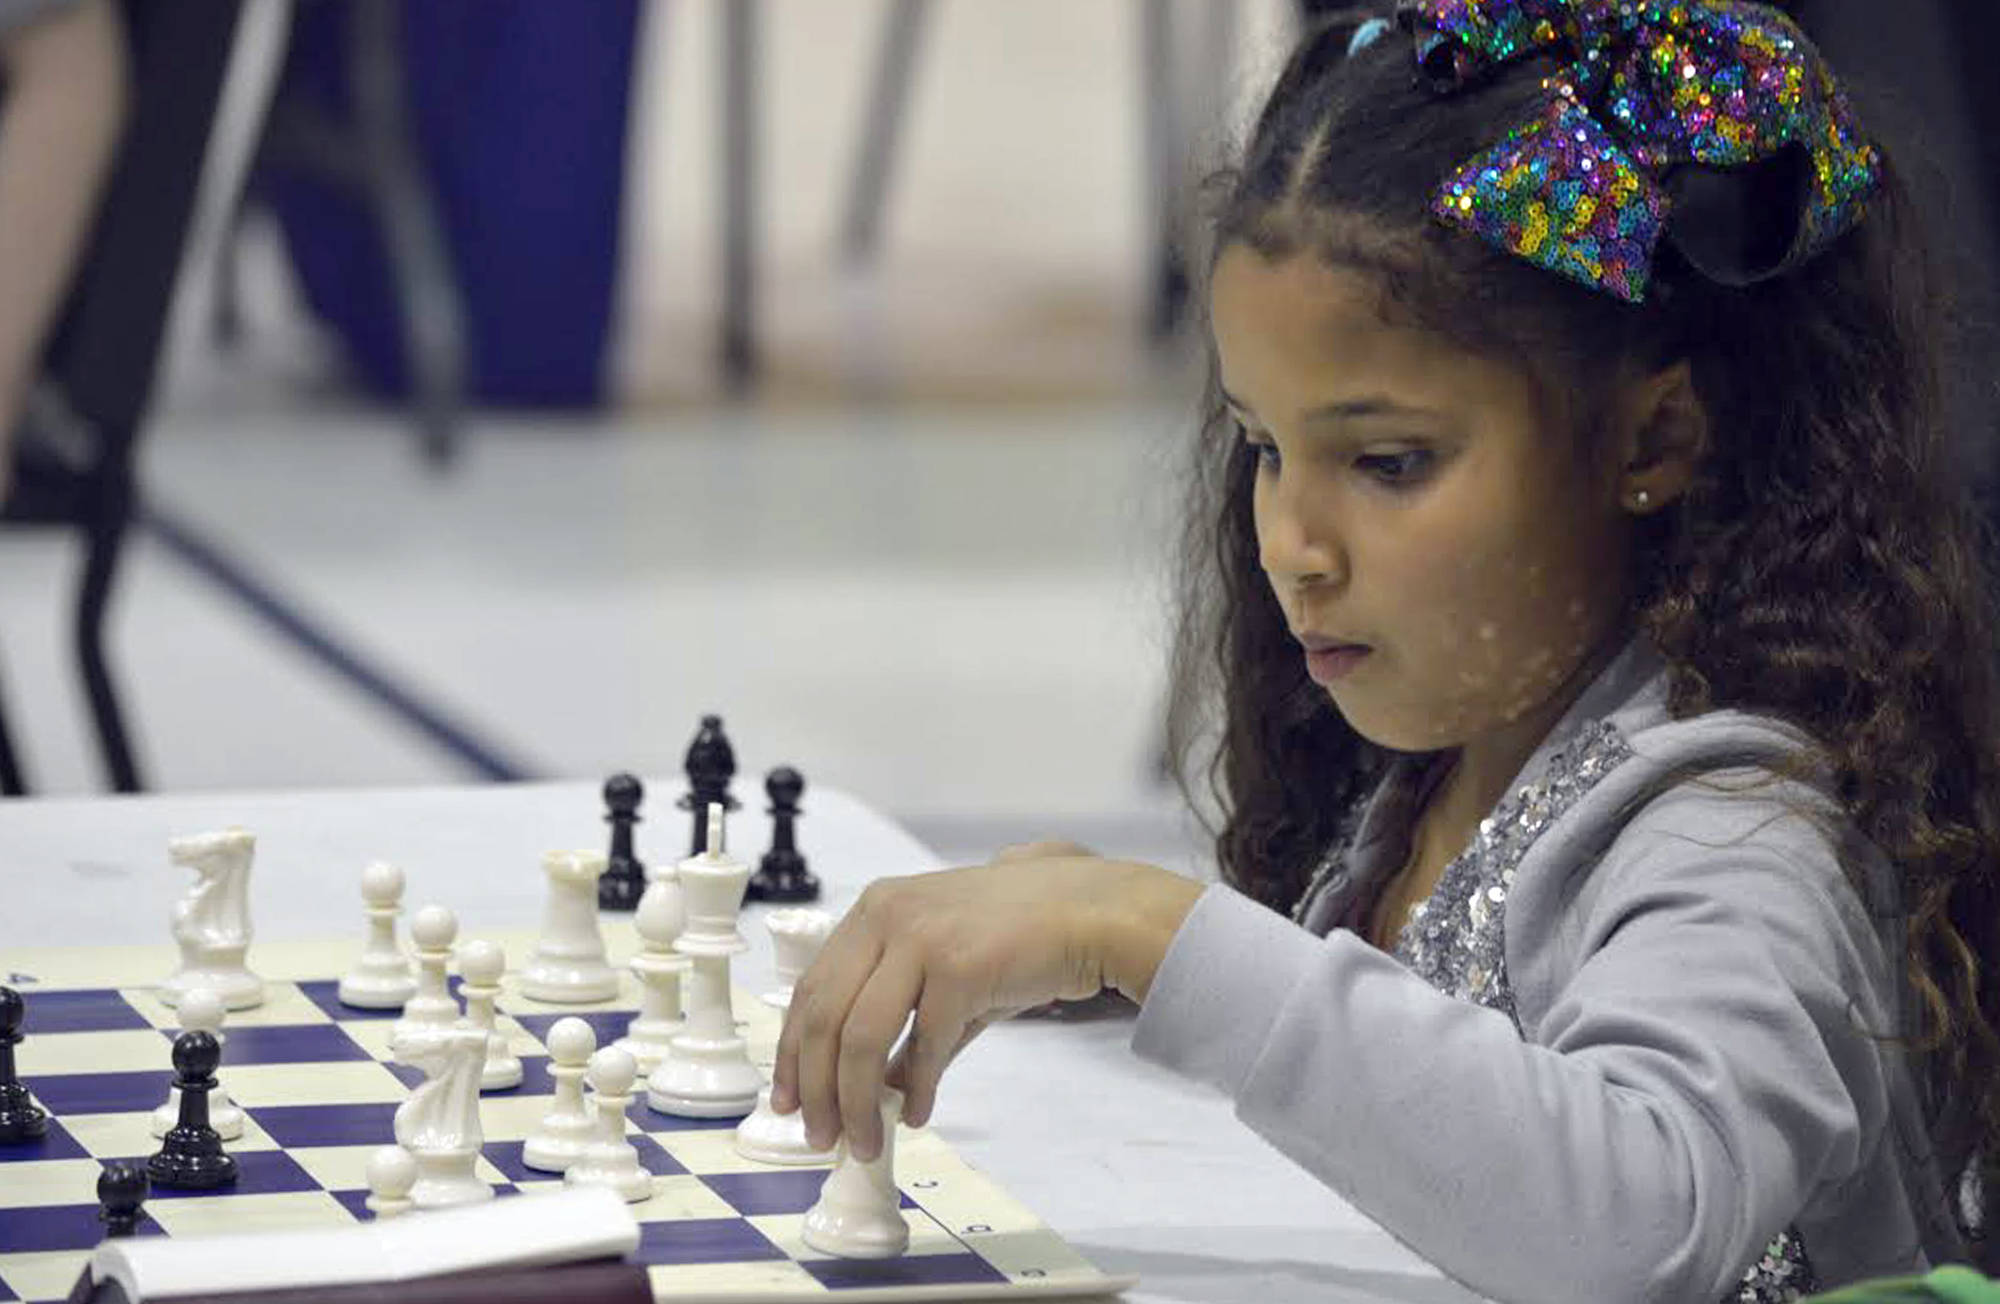 Checkmate Marlee Riggins from Bill Vedders’ third grade class at K-Beach Elementary competes in the chess club tournament earlier this month. The chess club, which is coached by third-grade teacher Cheryl Romatz, at the school has grown to become the “cool thing” to do according to Vedders. (Photo courtesy of Bill Vedders)